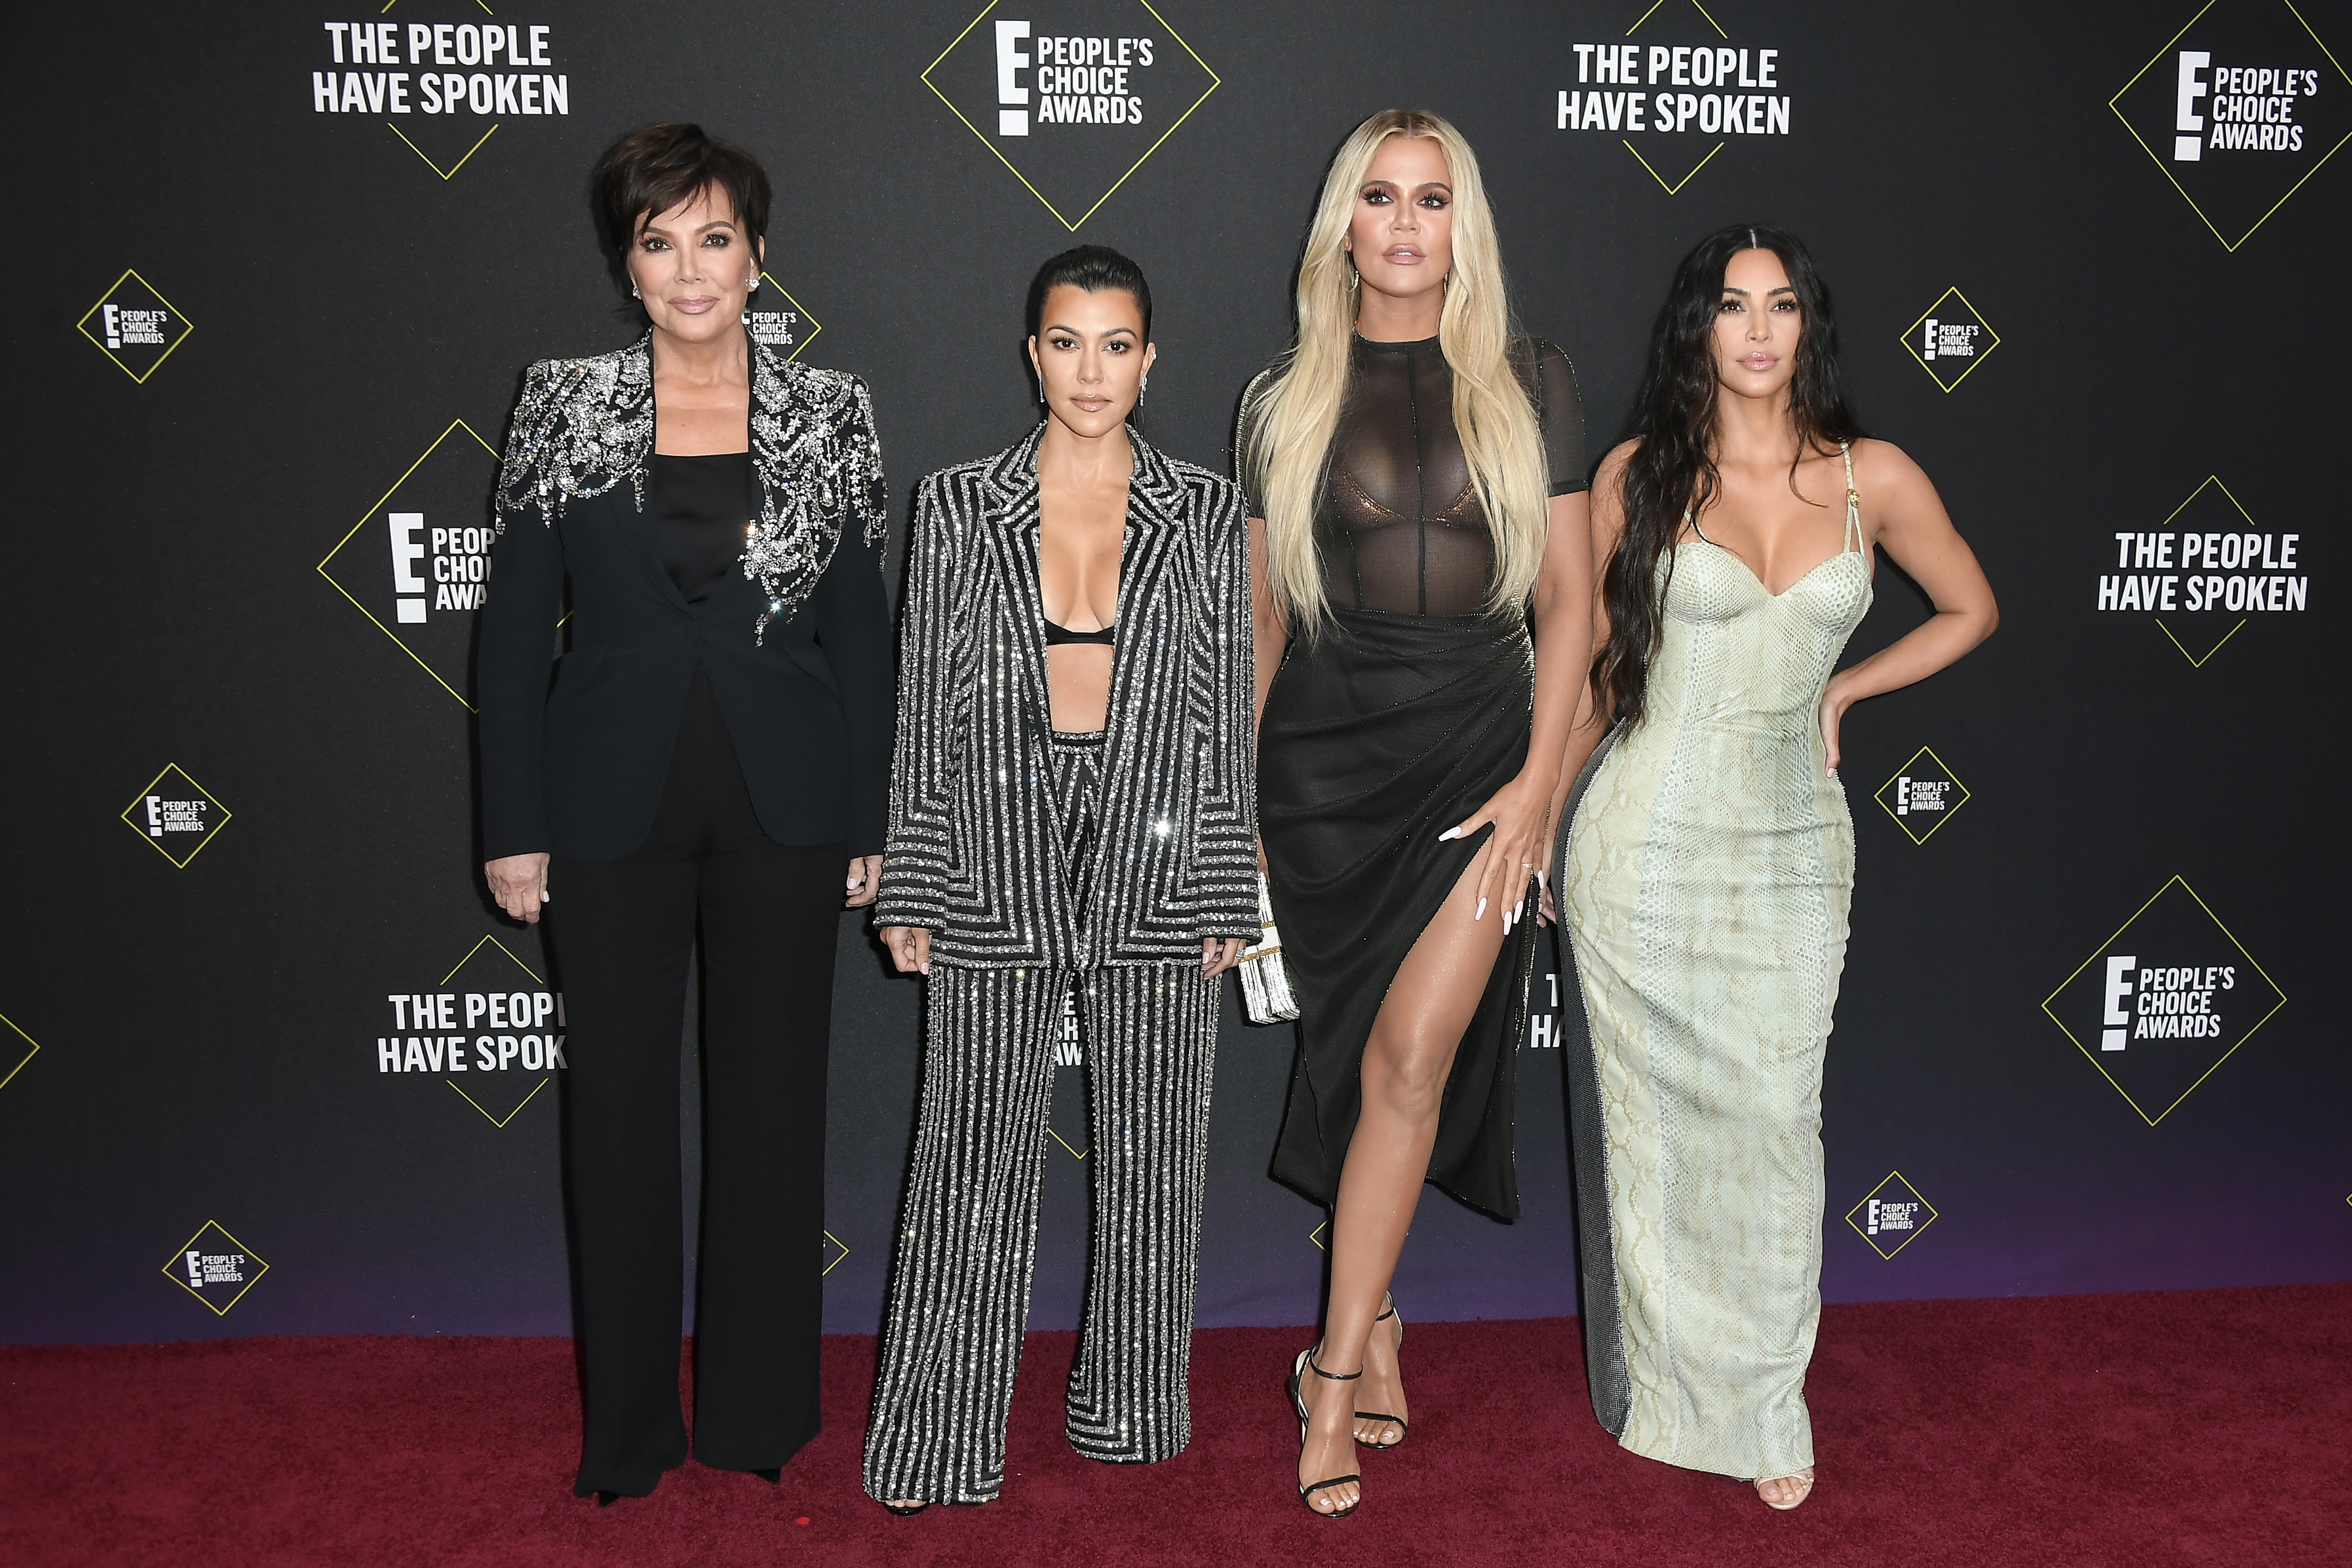 Kourtney posed with her famous family members at a red carpet event in November 2019